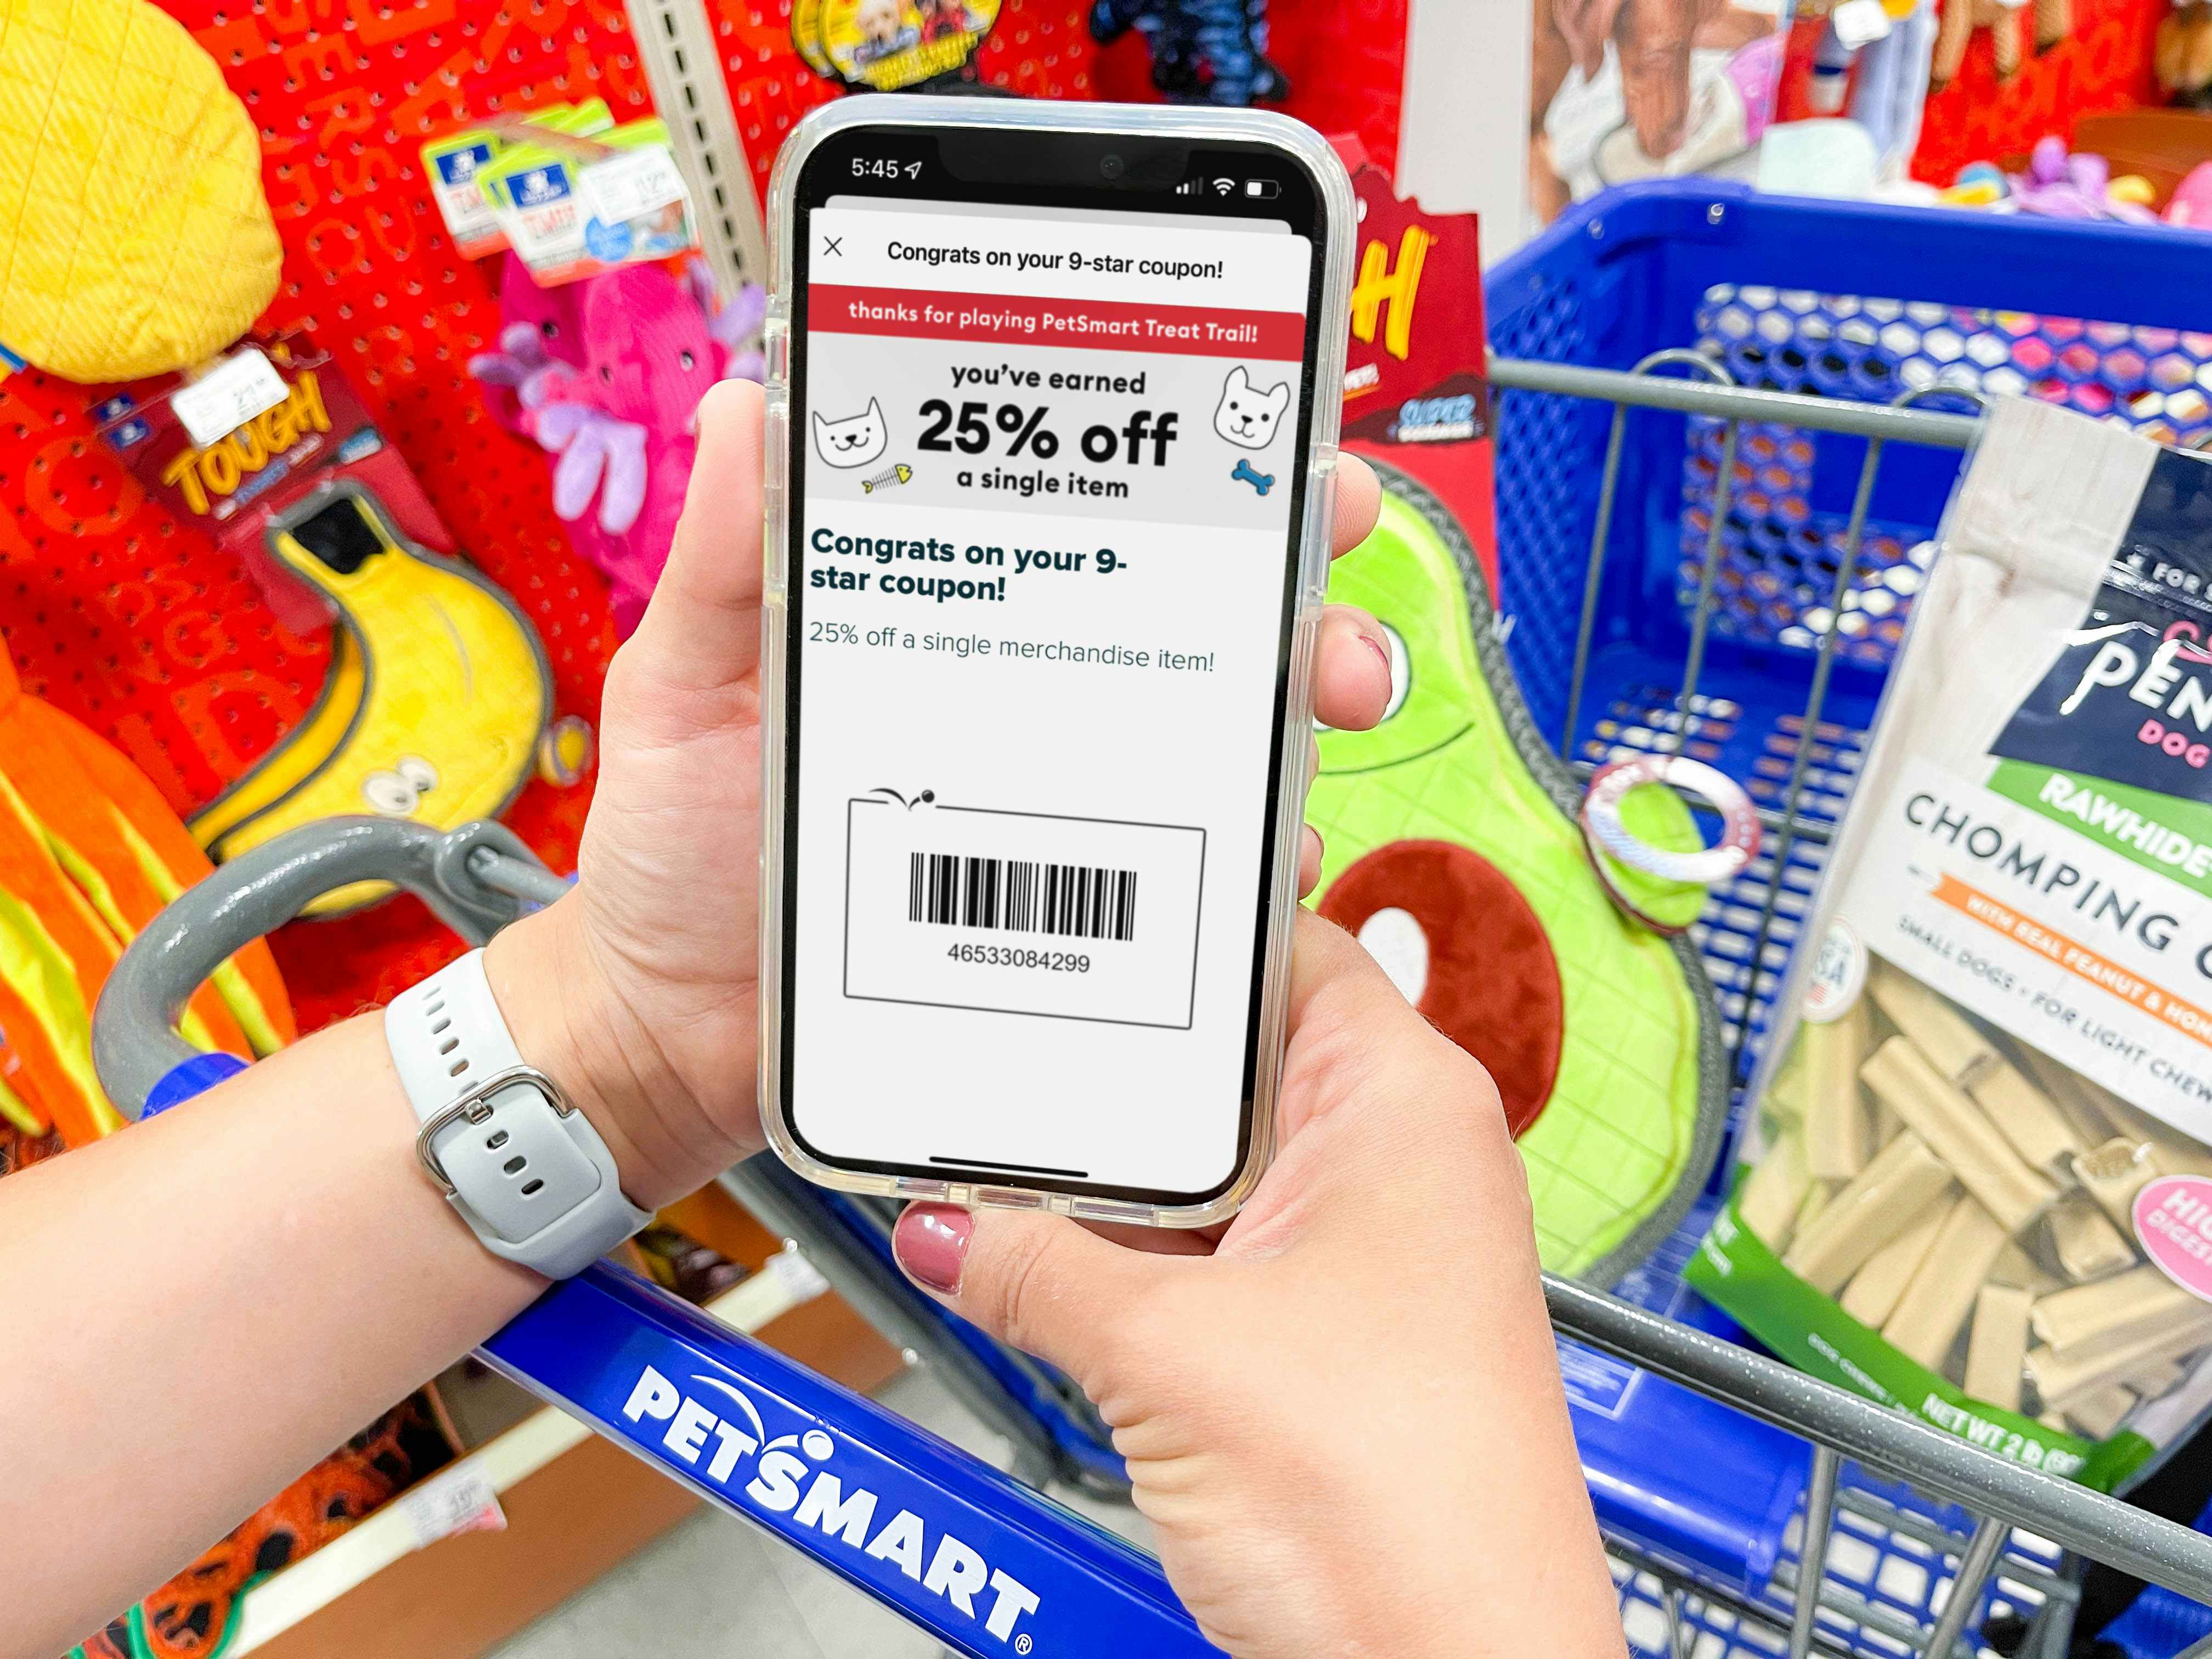 A person's hands holding a cellphone with treat trail game coupon on the petsmart app in front of a PetSmart shopping cart.